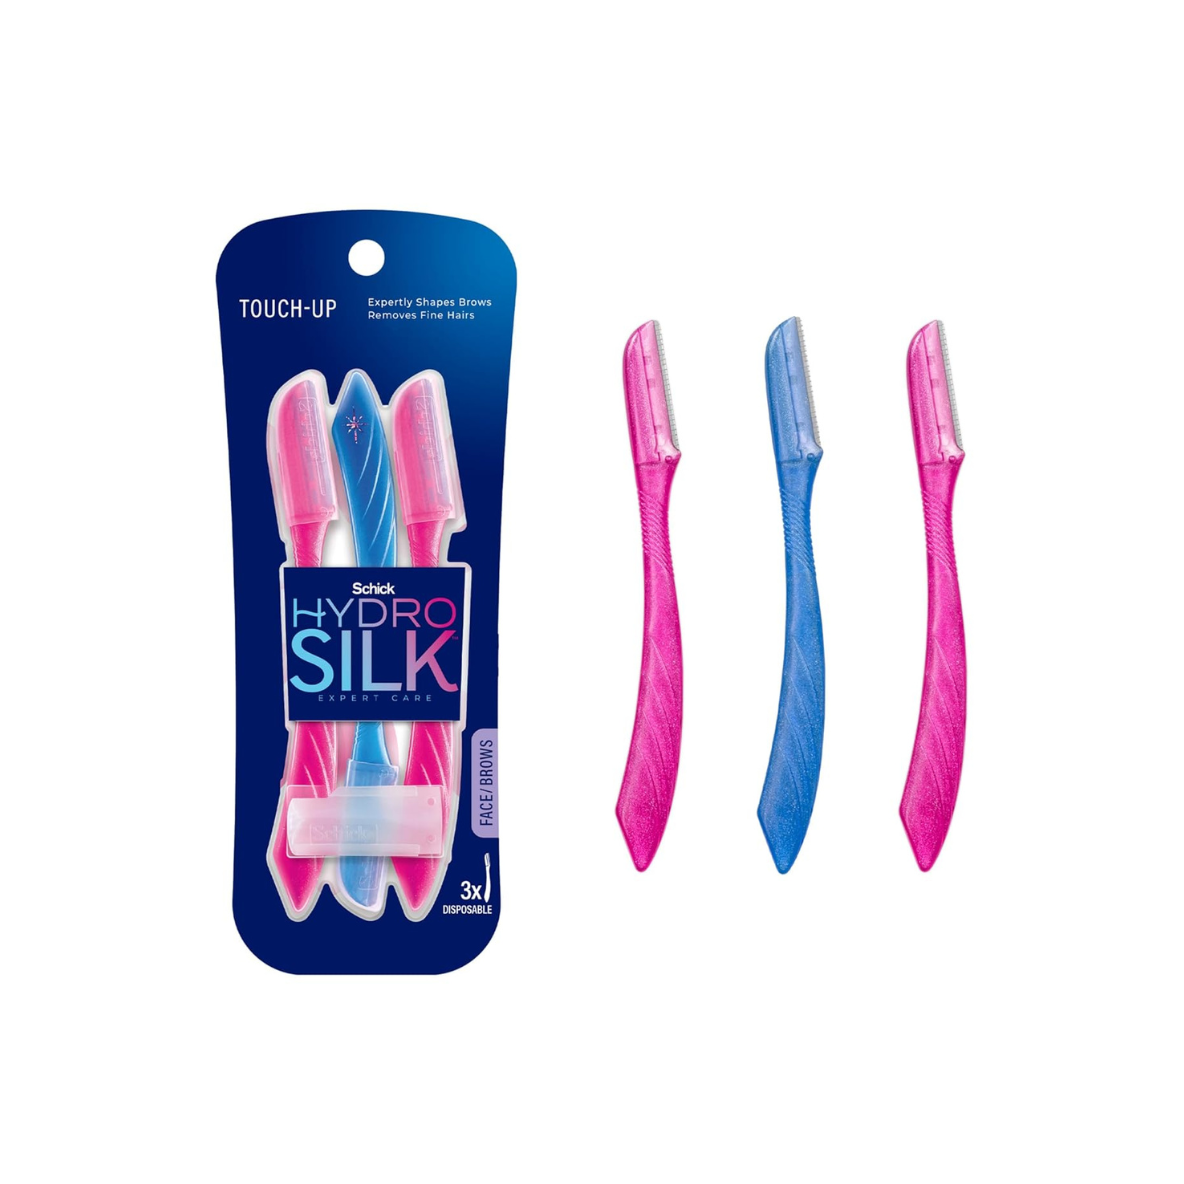 3 Pack Of Schick Hydro Silk Touch-Up Dermaplaning Tools